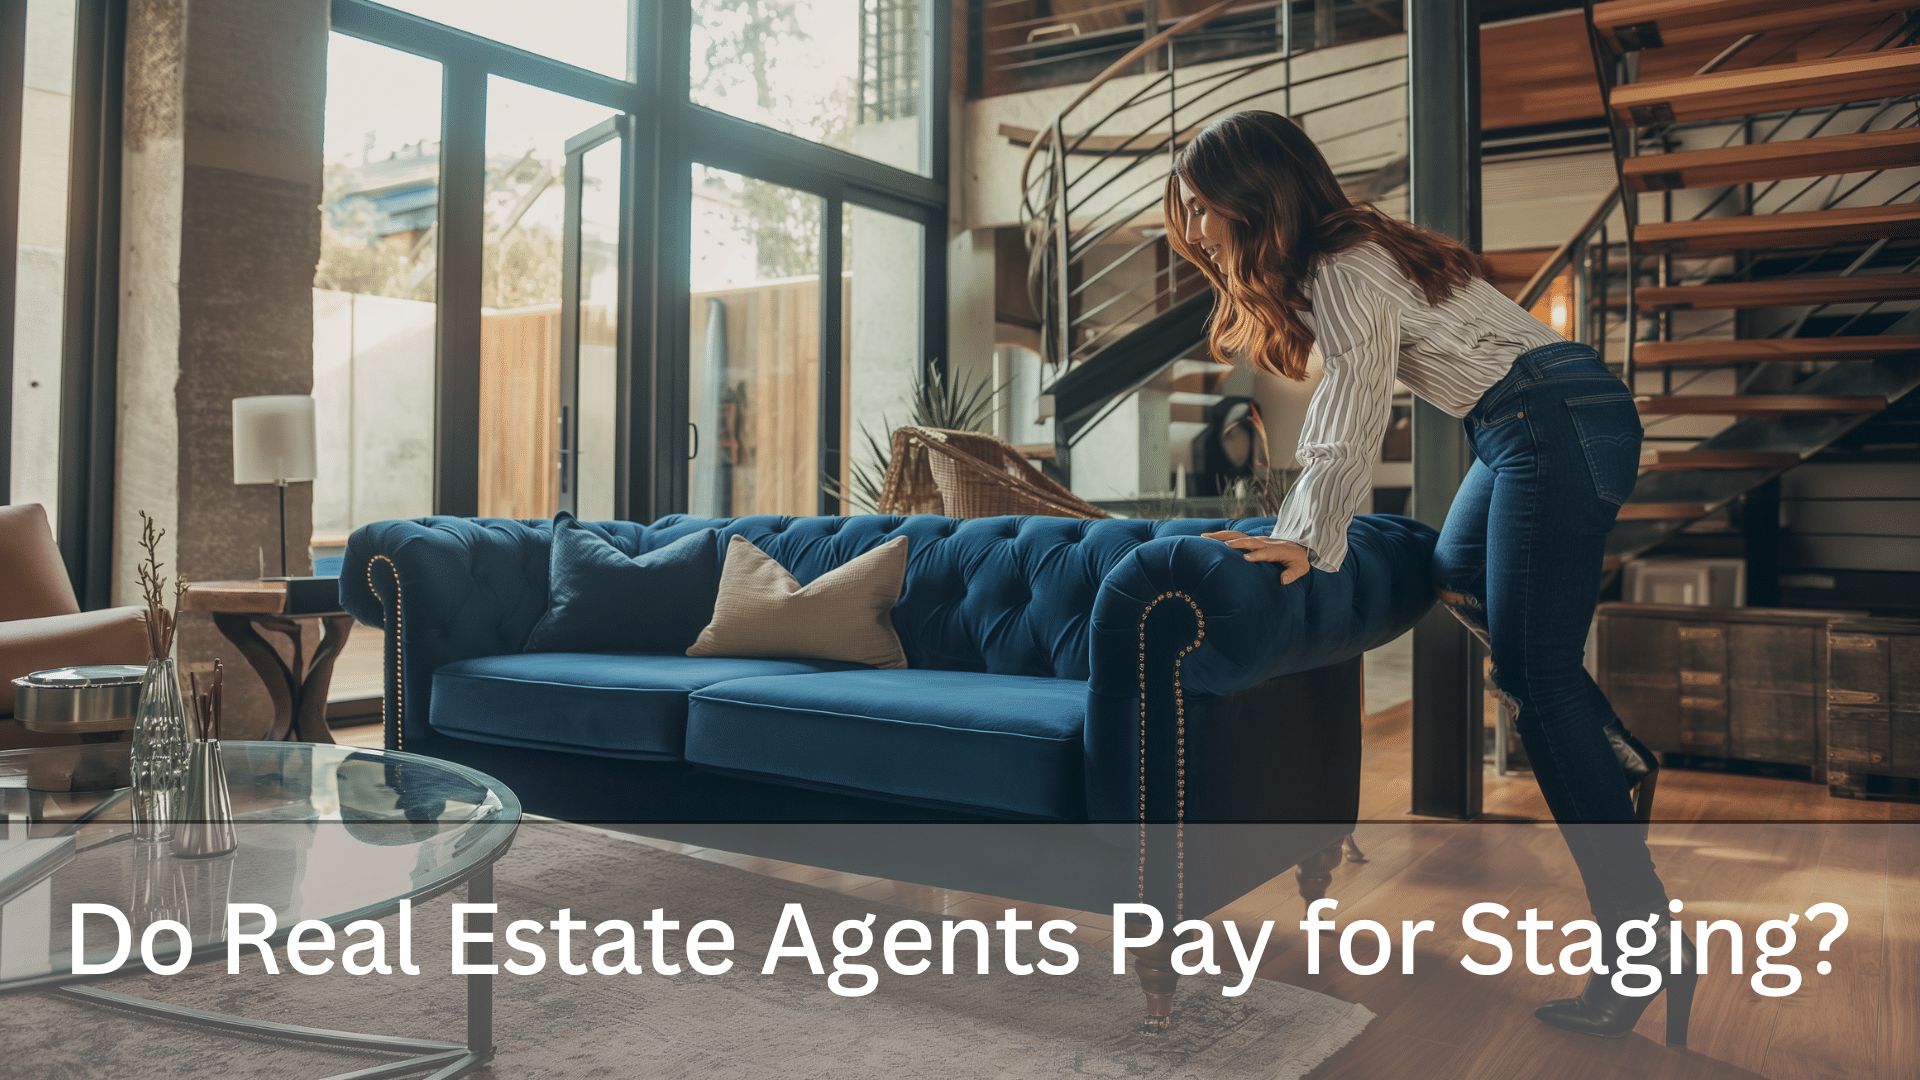 Do real estate agents pay for staging